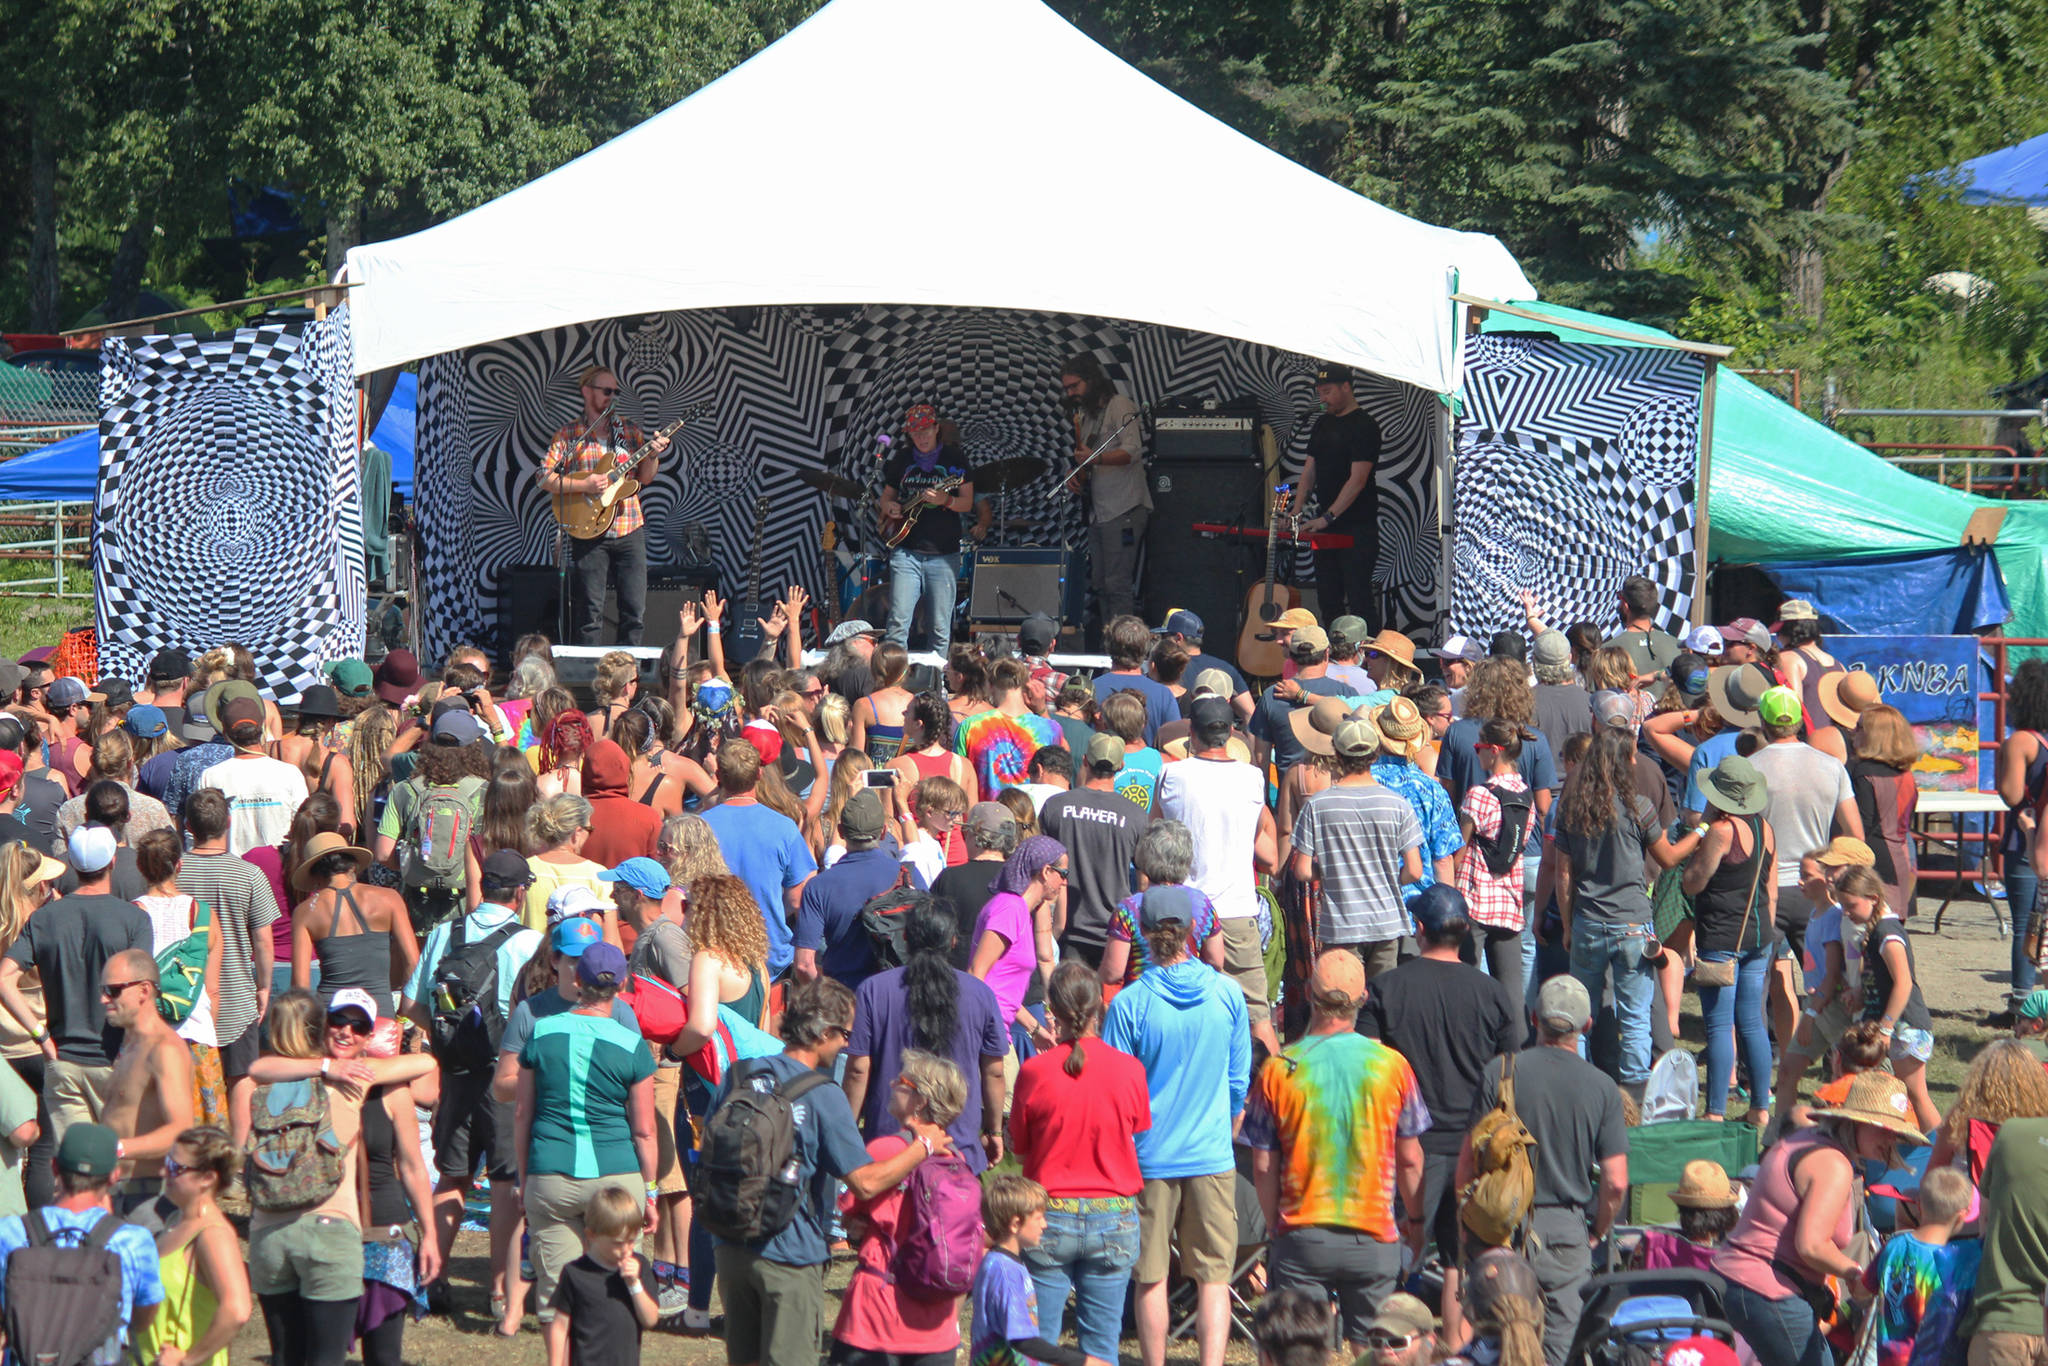 Music lovers listen to a performance on the River Stage at this year’s Salmonfest on Saturday, Aug. 4, 2018 in Ninilchik, Alaska. (Photo by Megan Pacer/Homer News)